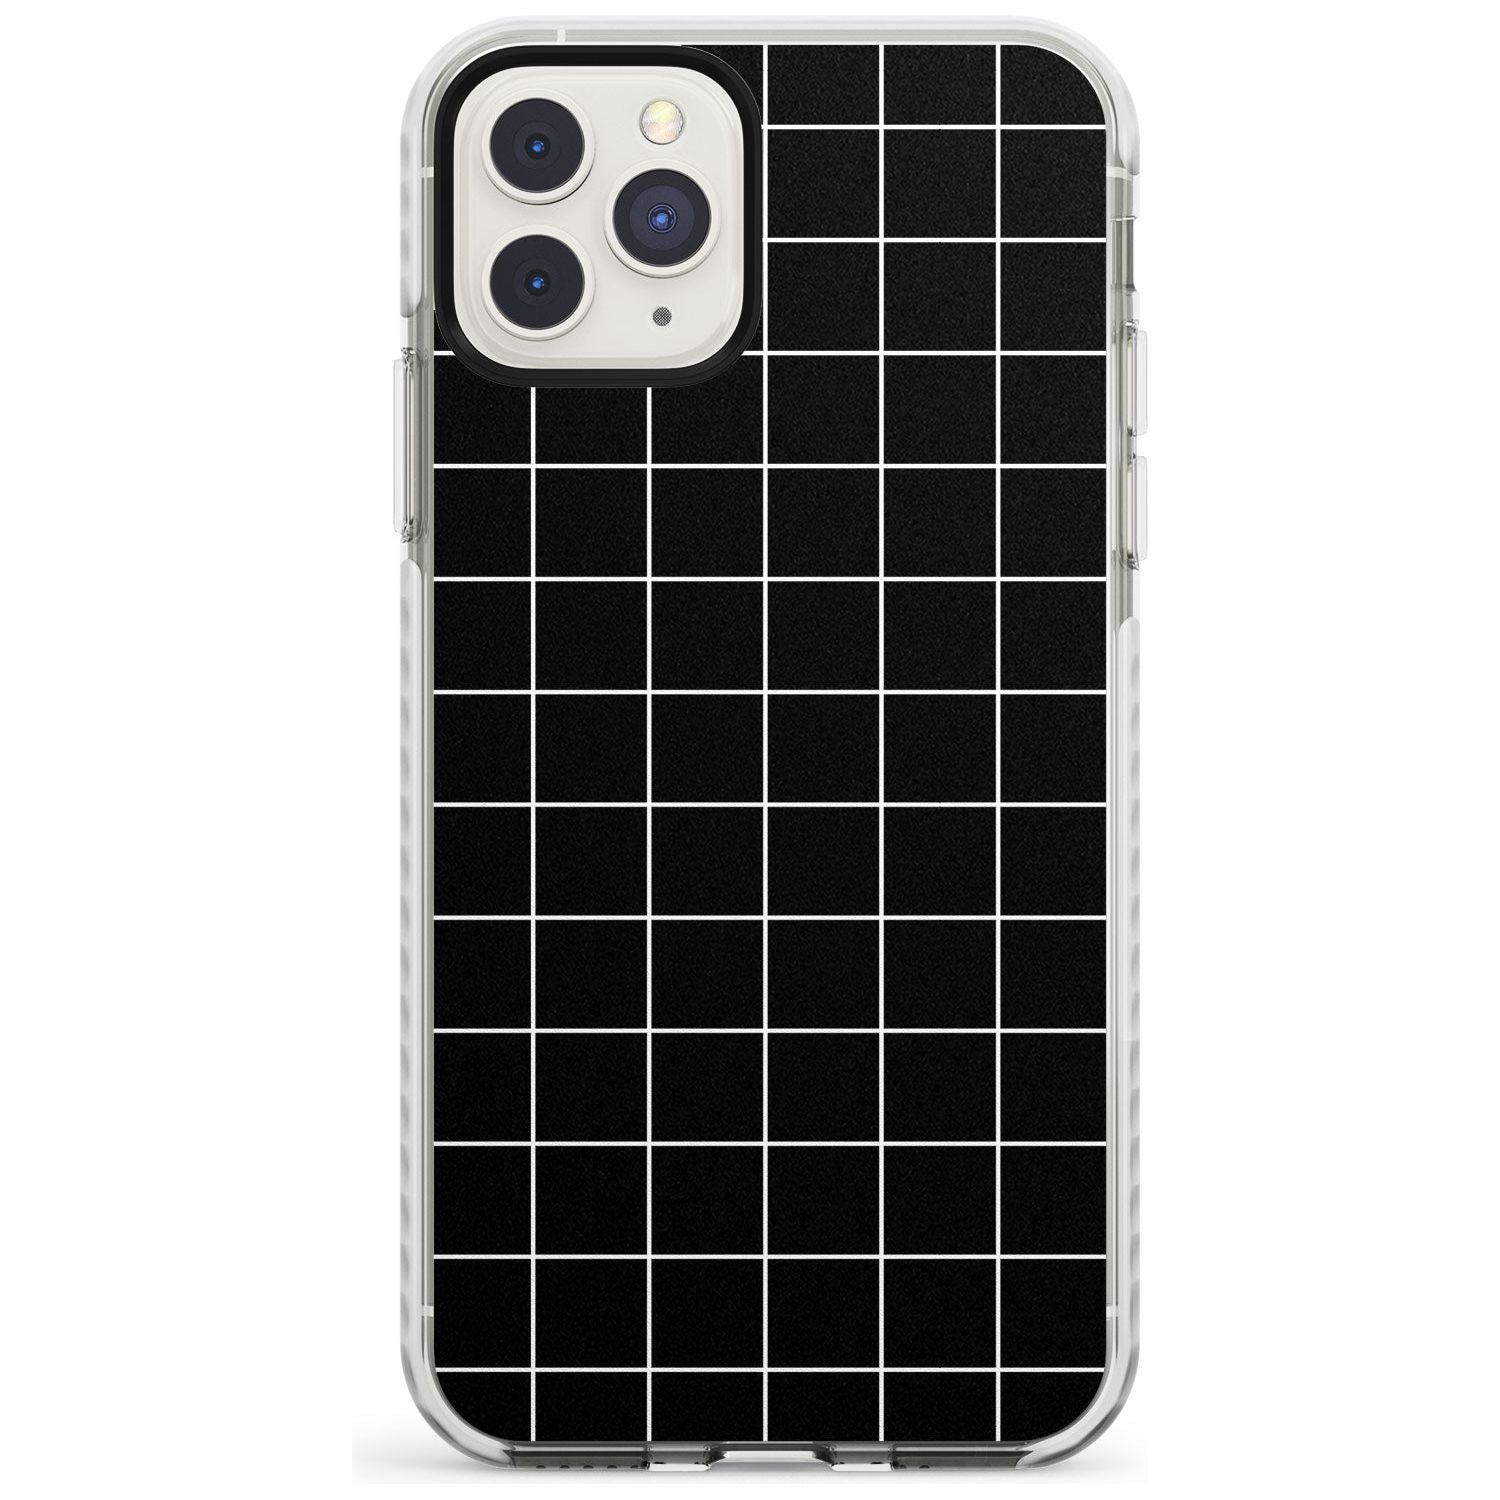 Simplistic Large Grid Pattern Black Impact Phone Case for iPhone 11 Pro Max